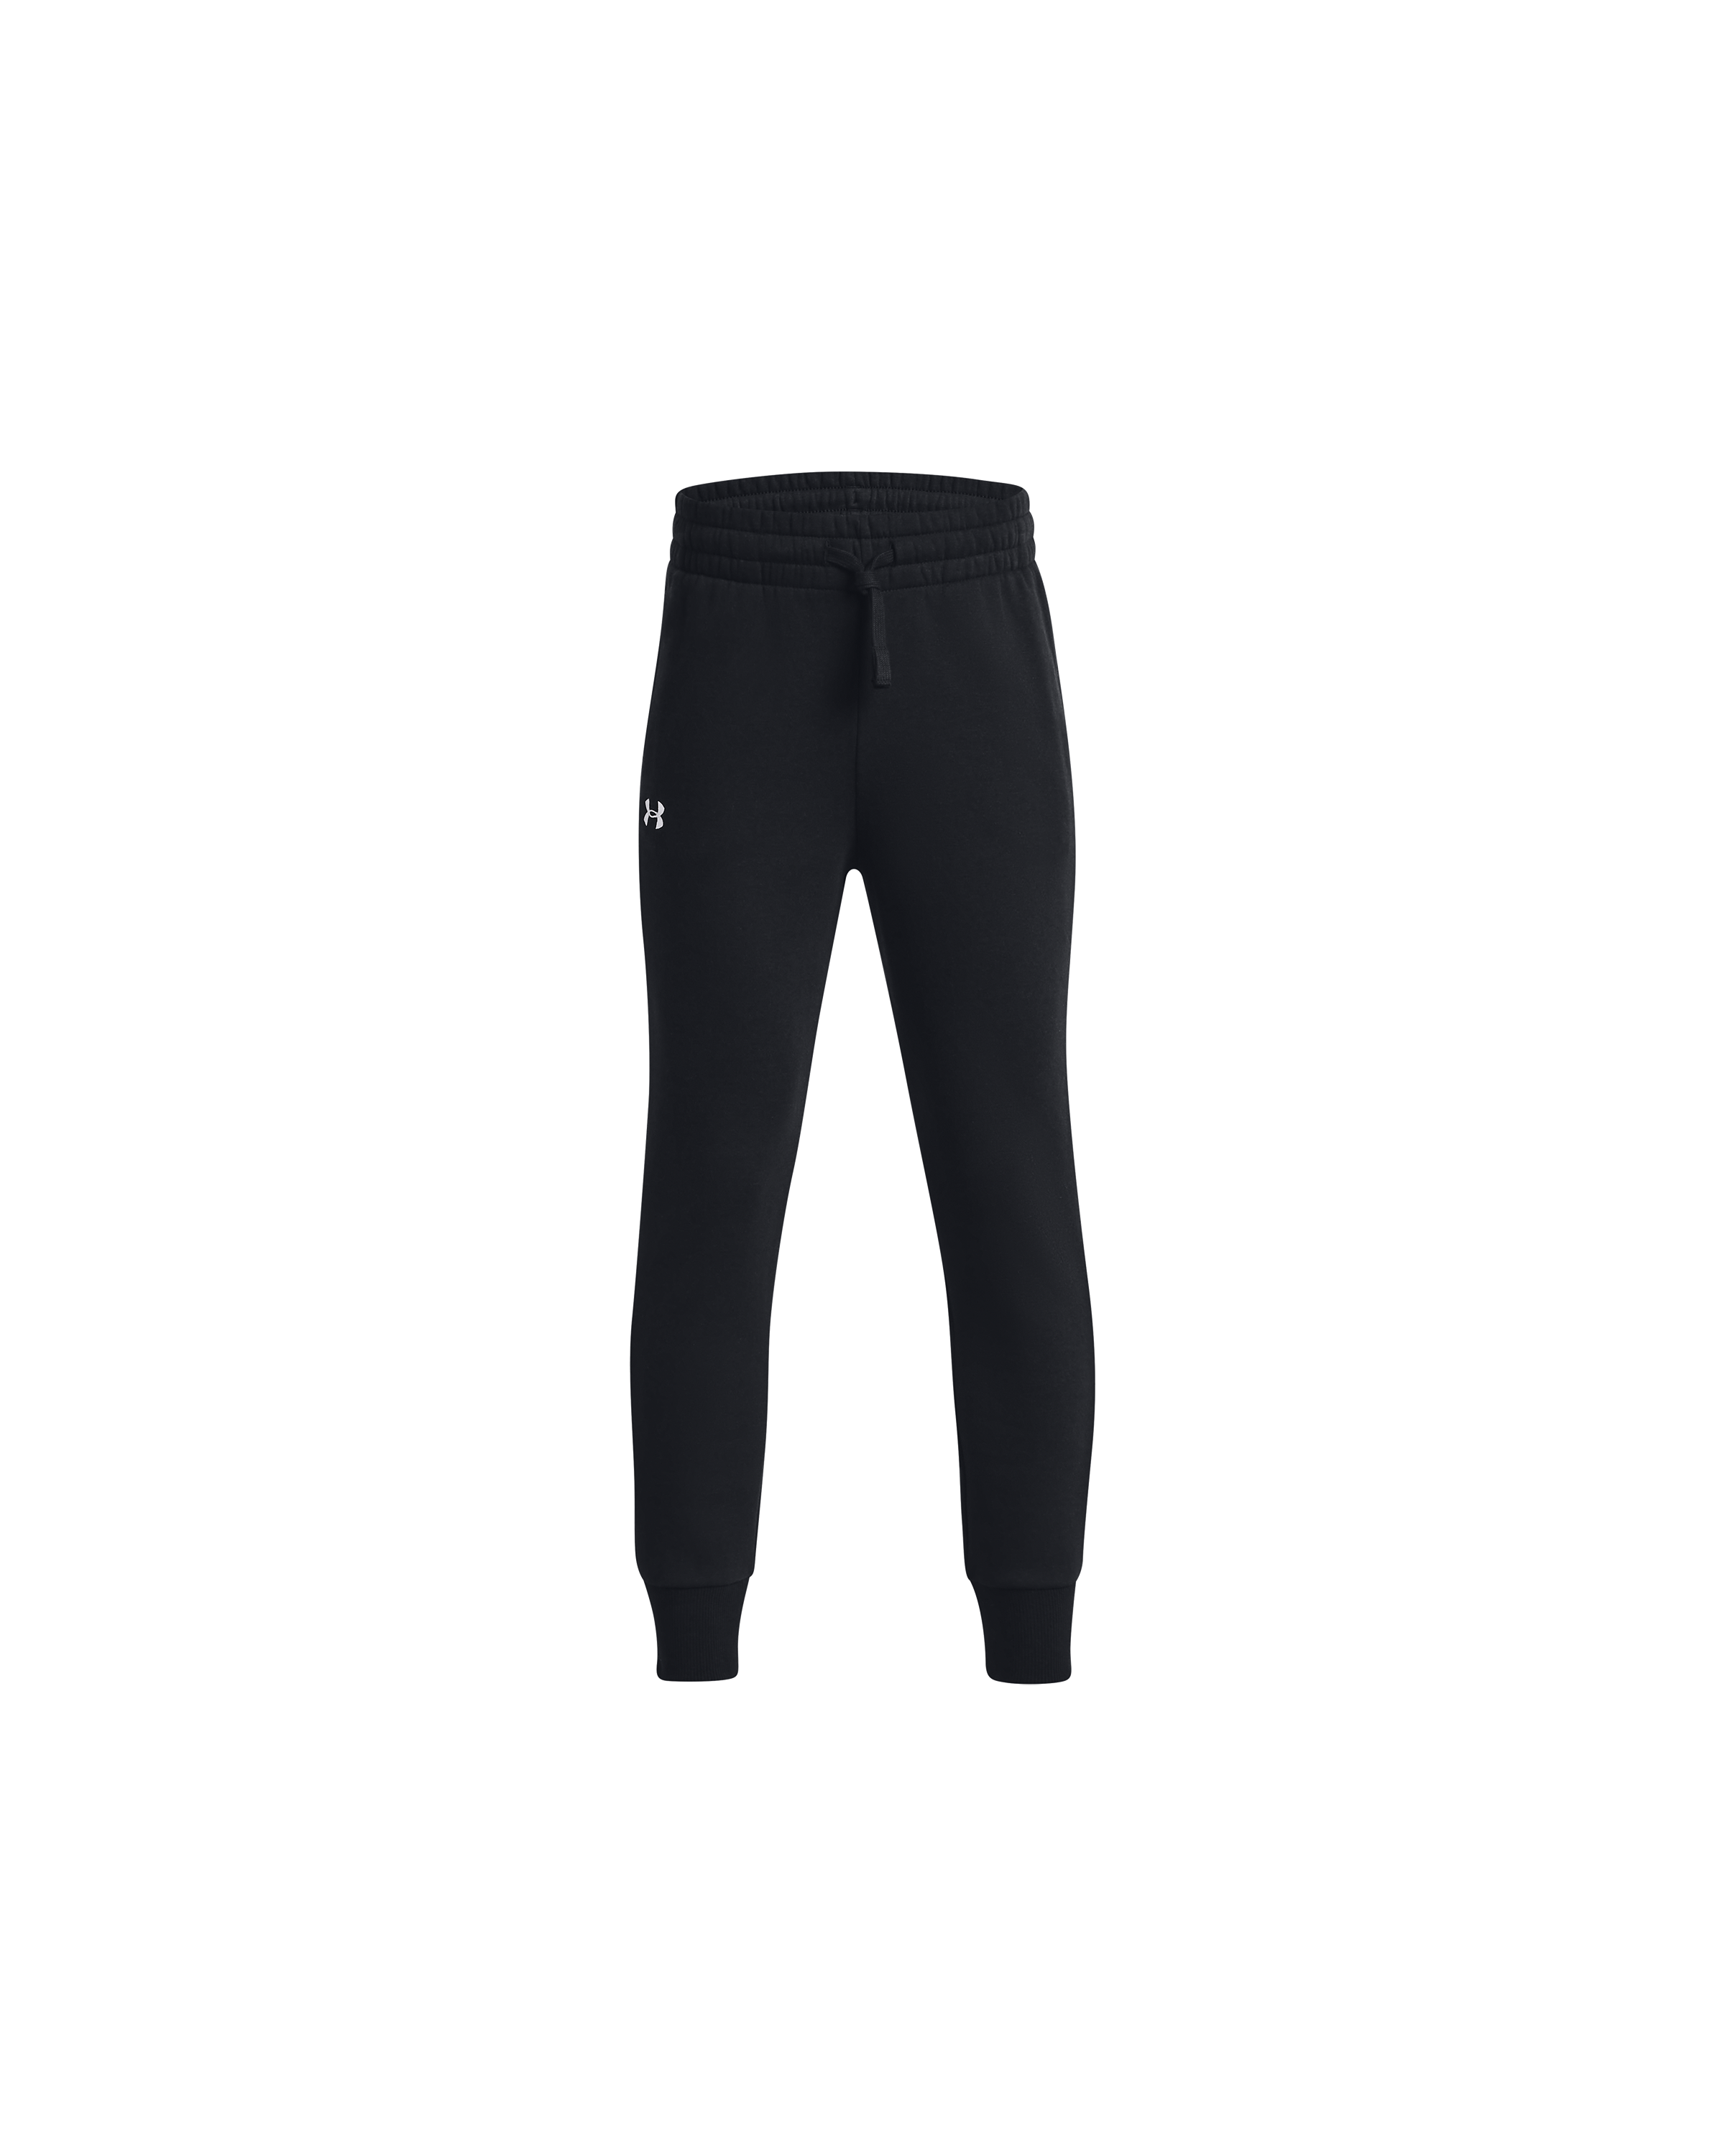 Girls' Rival Fleece Joggers from Under Armour